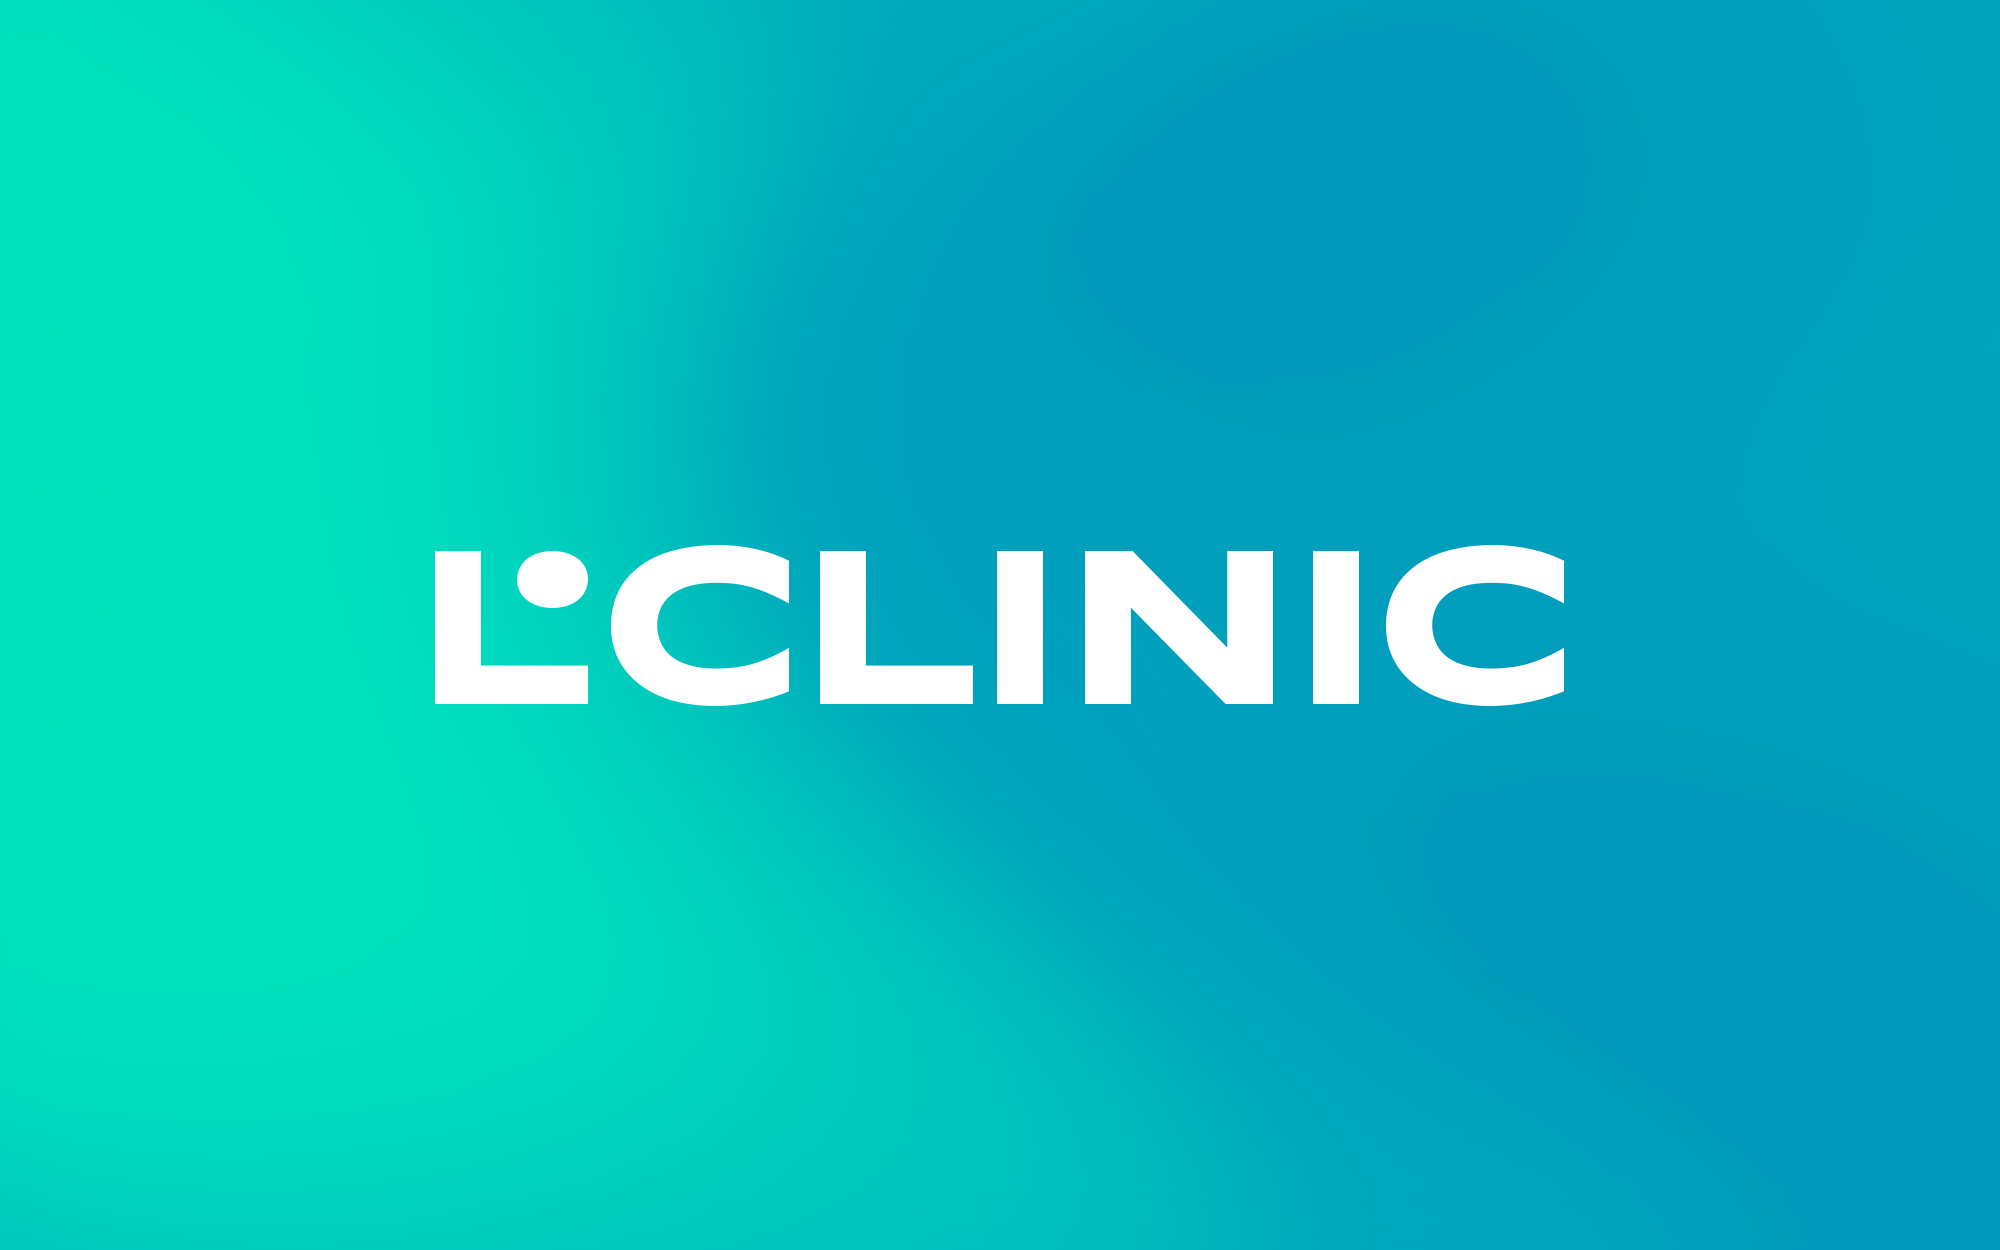 L-clinic by Proxima agency - Creative Work